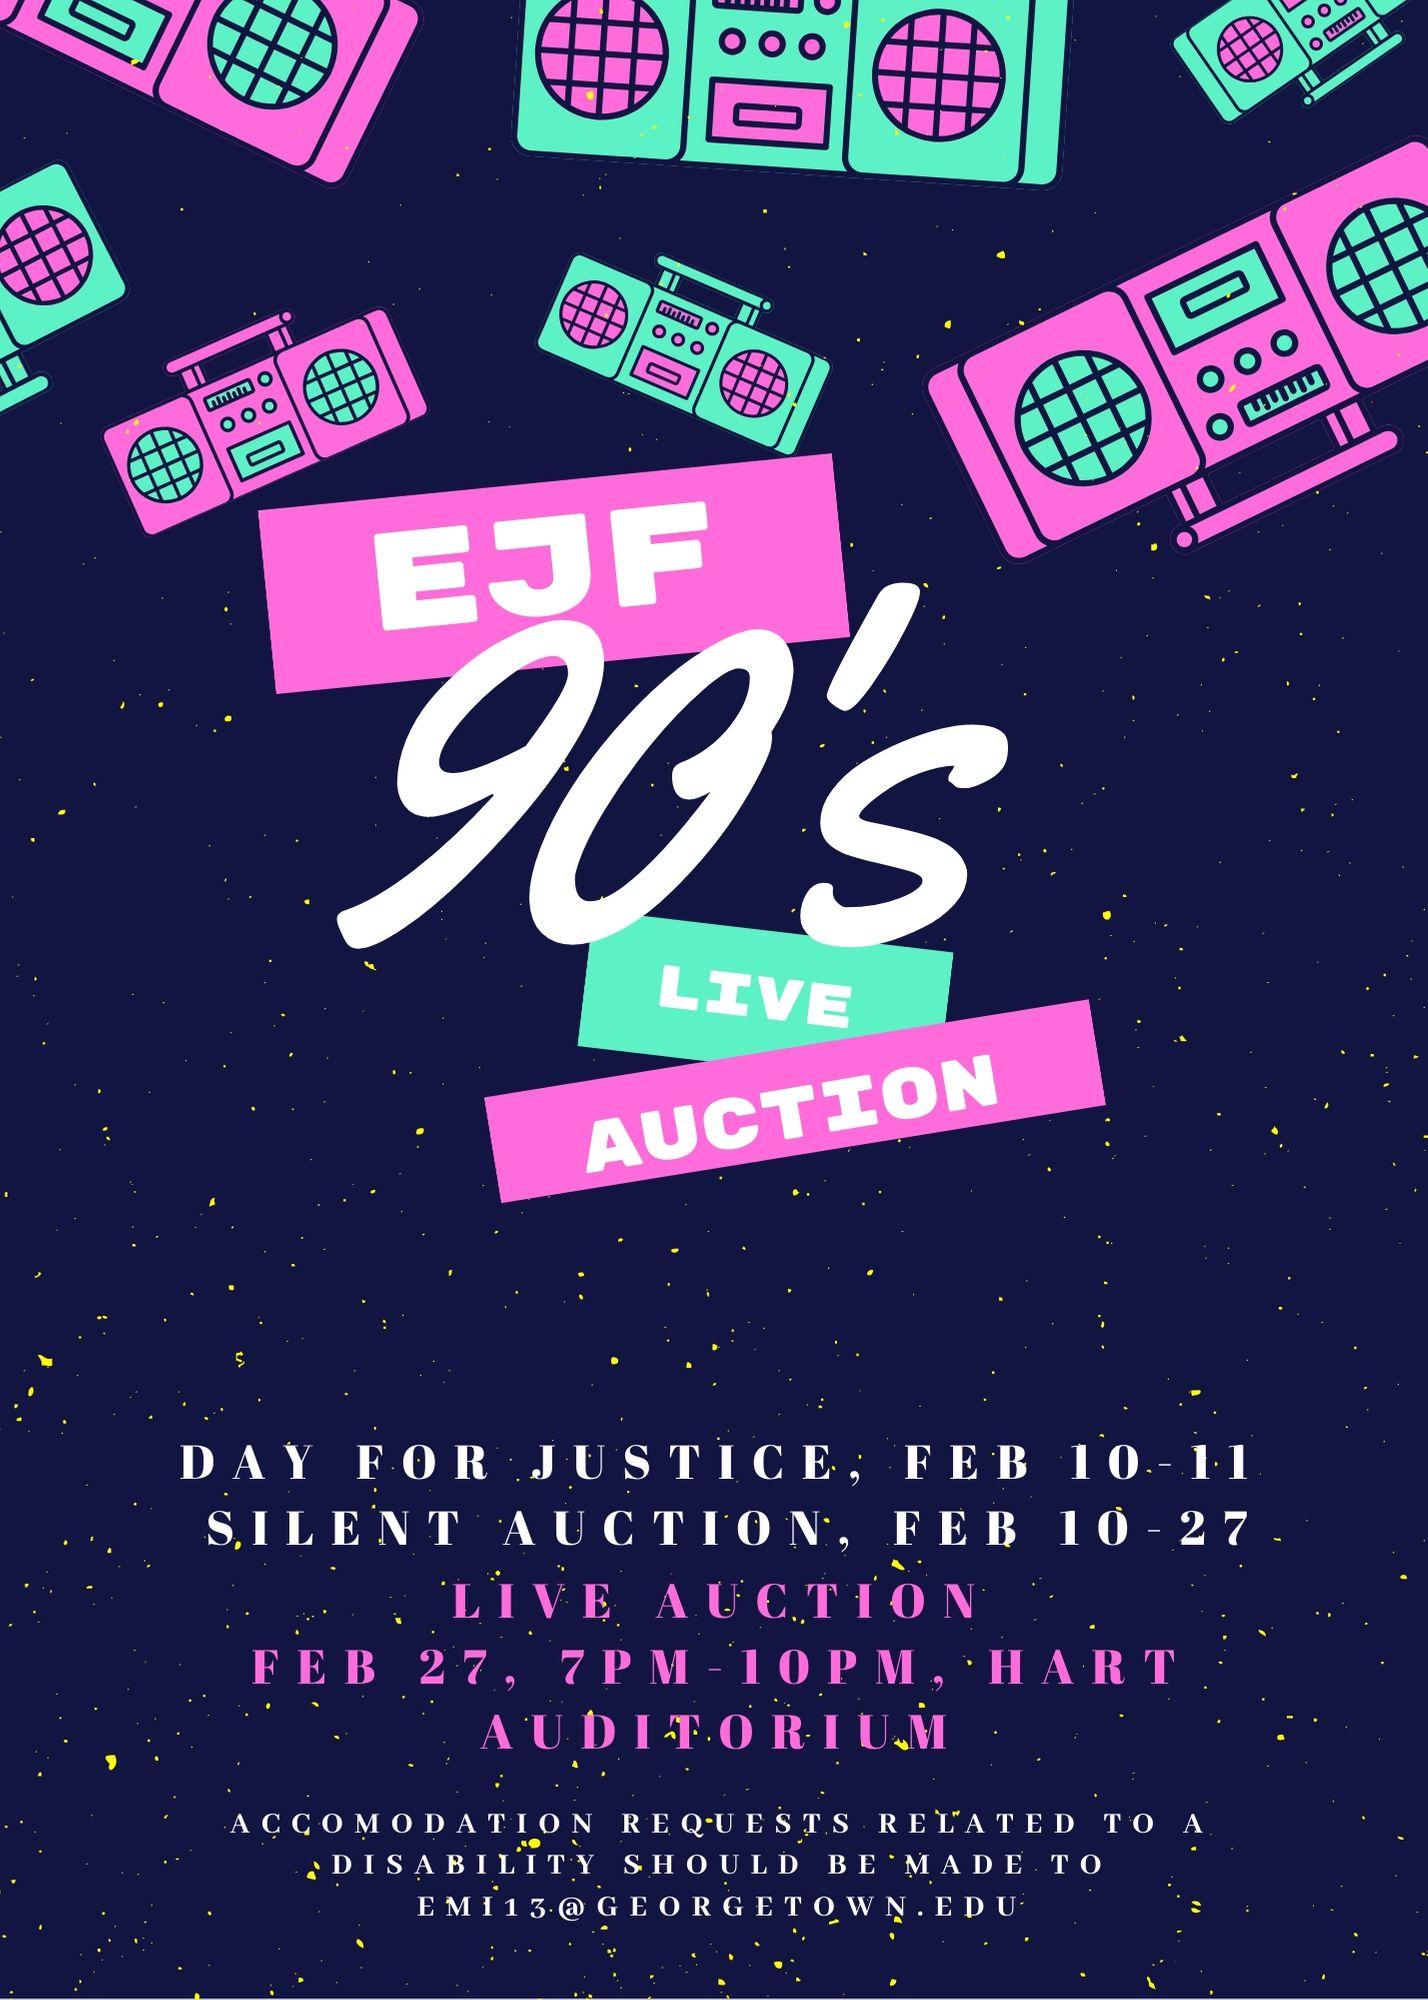 2020 EJF Live Auction - The One With the Live Auction